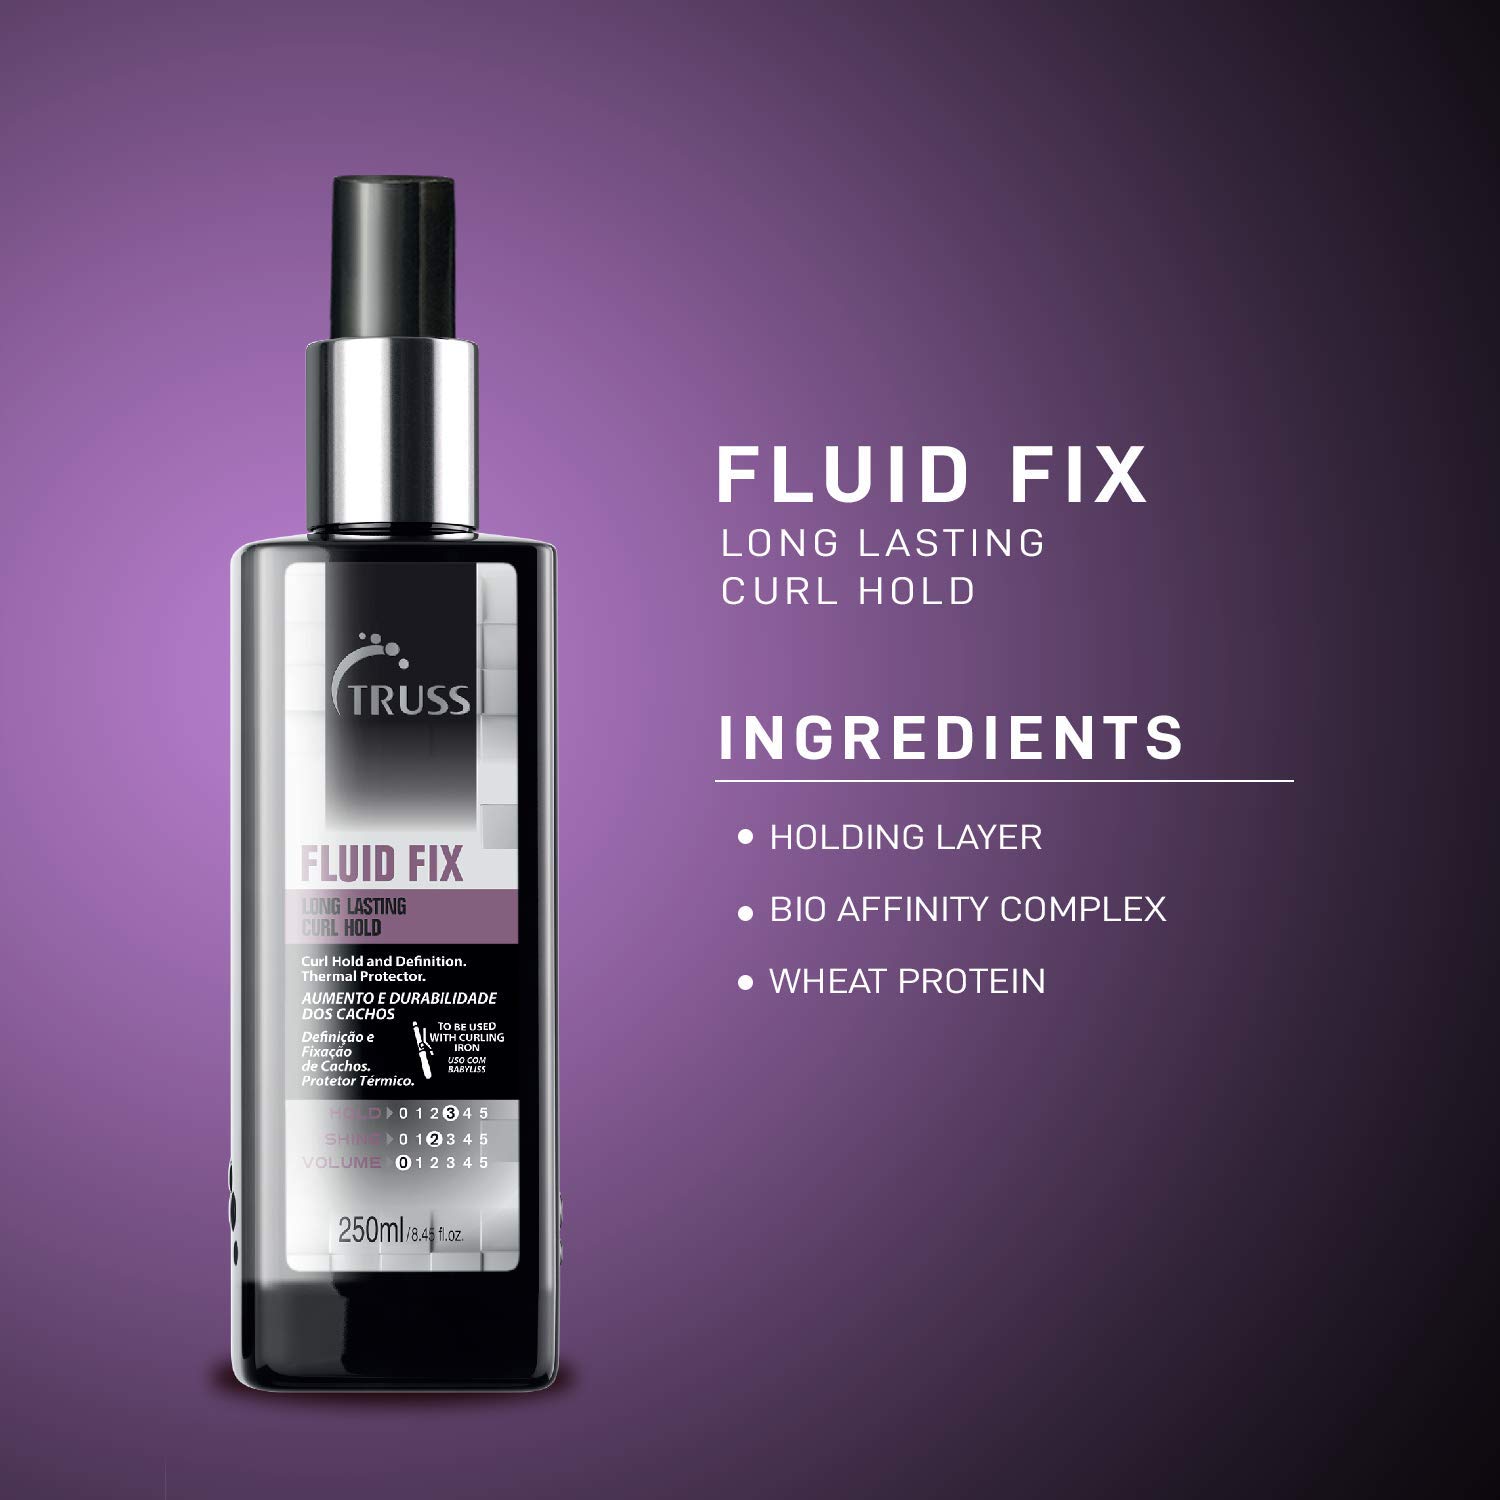 TRUSS Fluid Fix - Long-lasting Curl And Defining Hold - Leave-in Heat Protectant Styling Spray For Hair - Provides Definition And Volume At The Roots For Curls